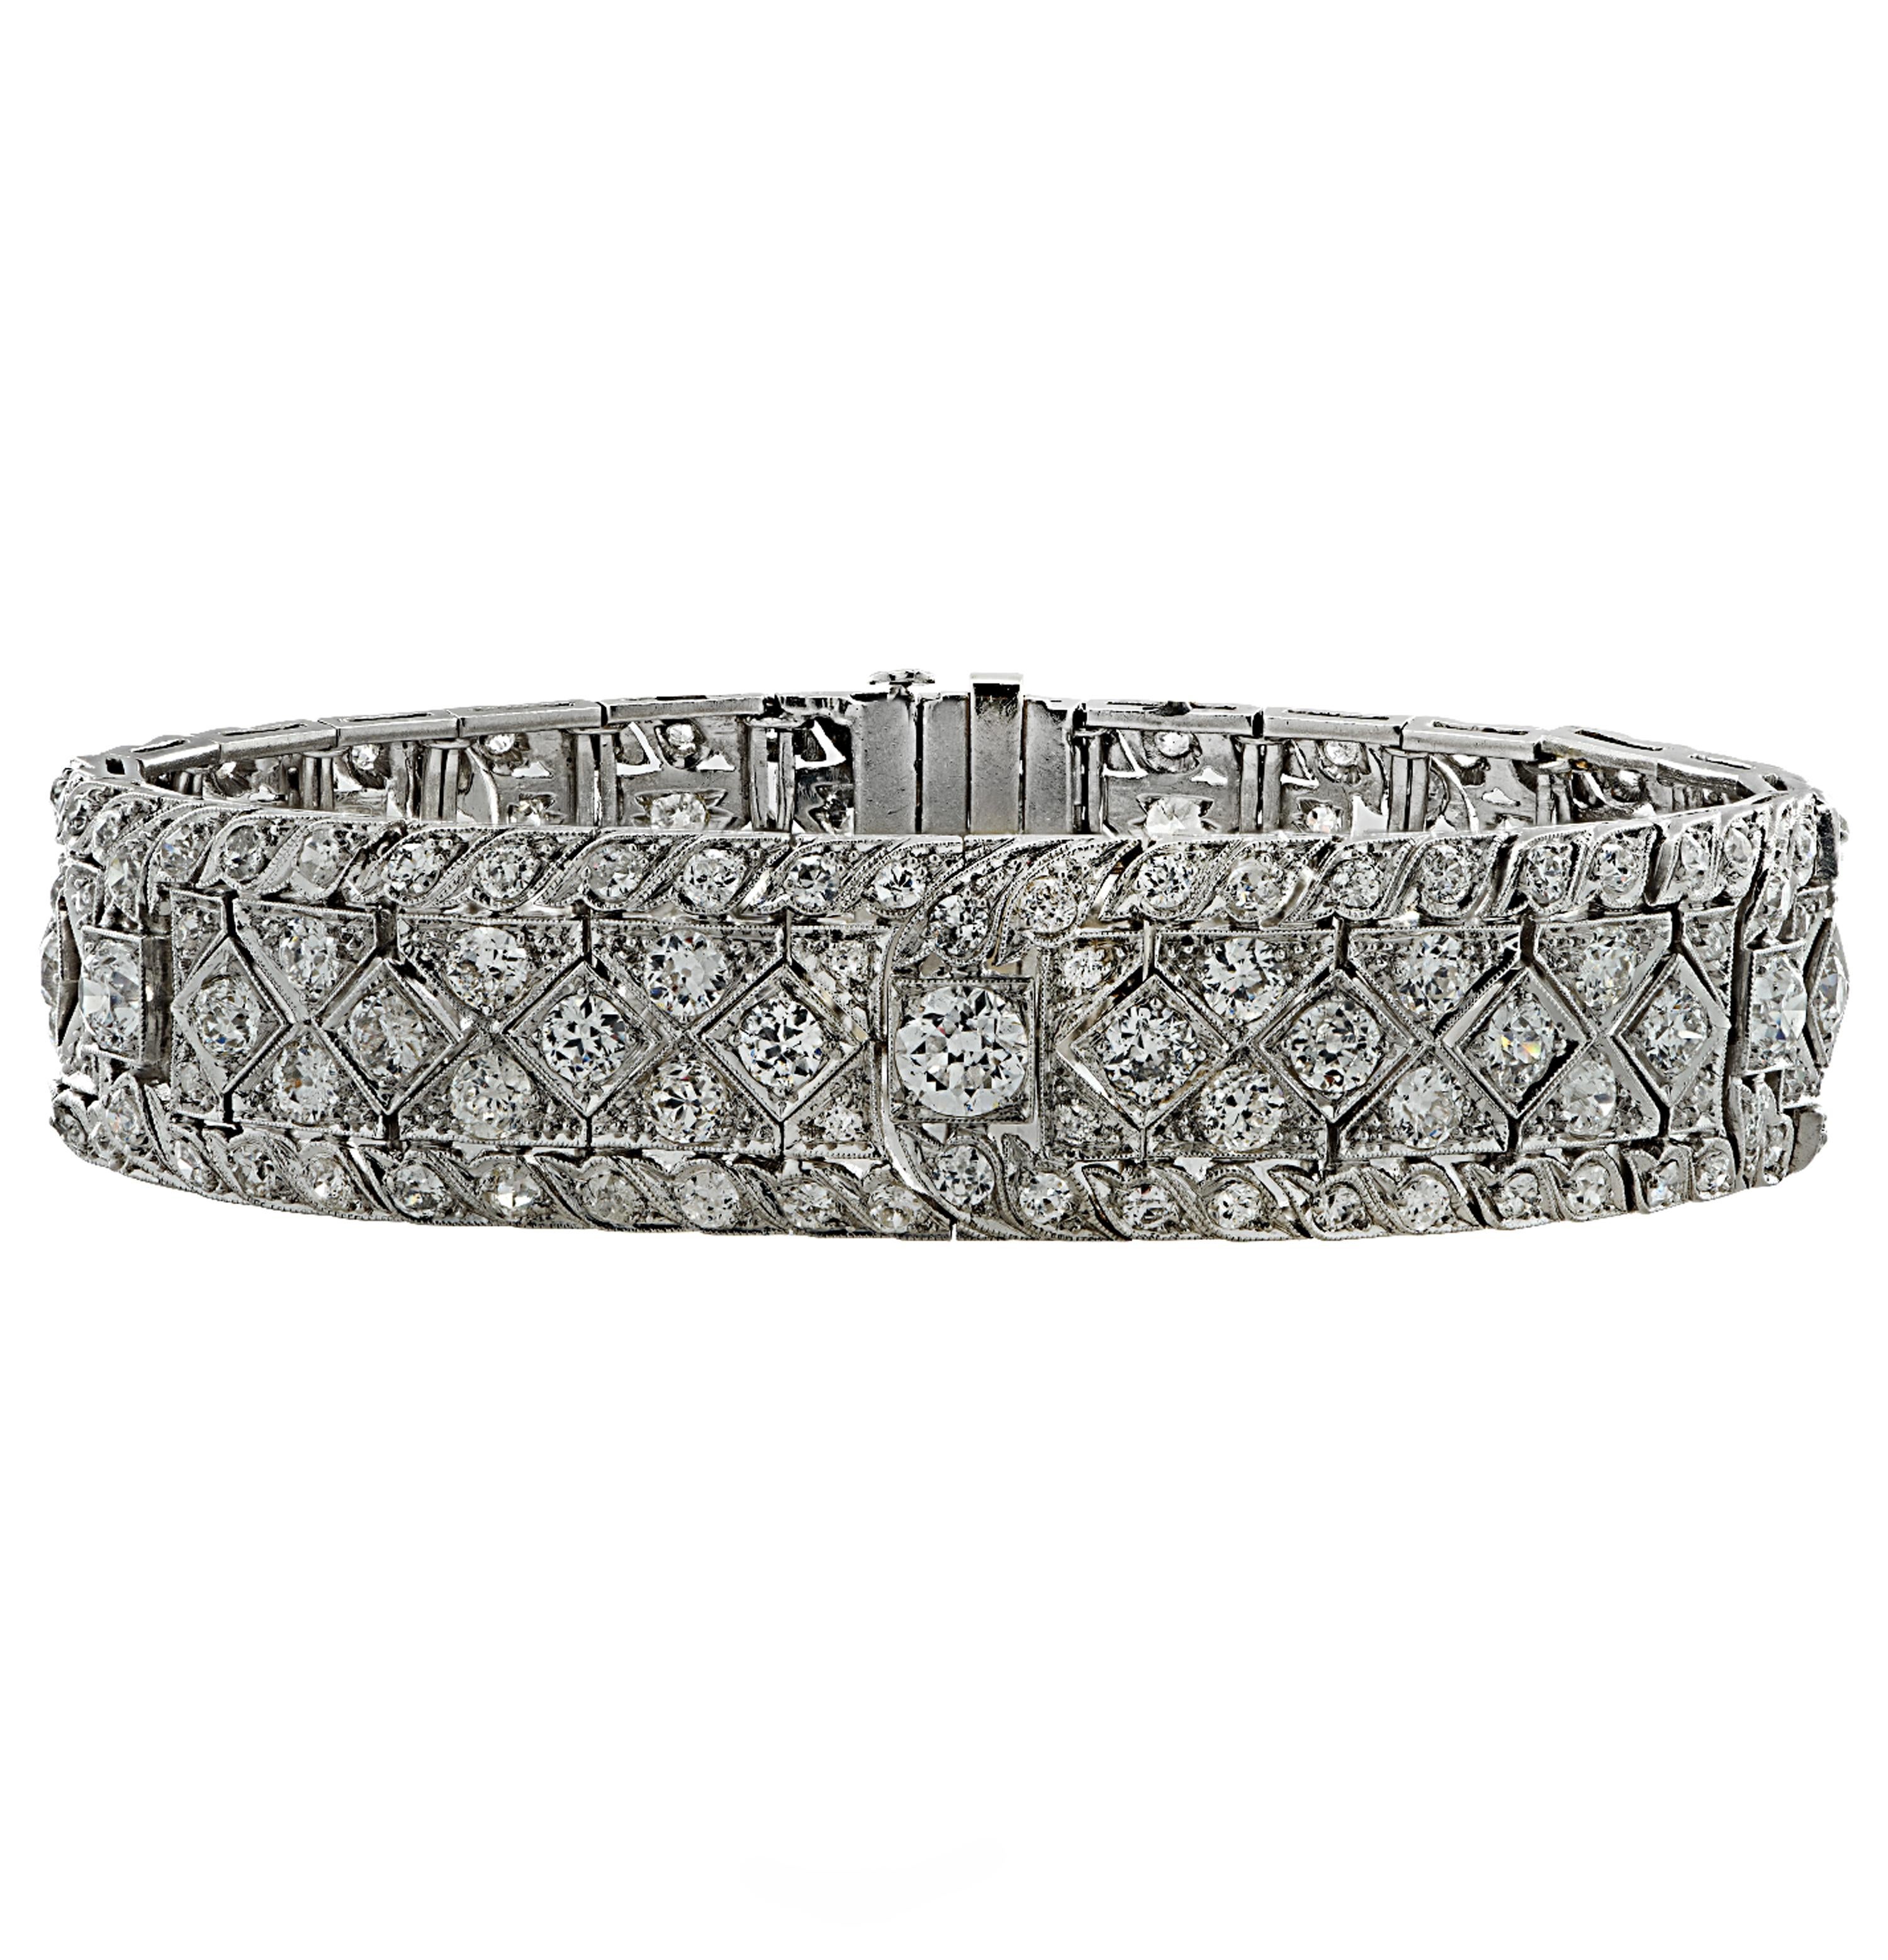 Spectacular Art Deco bracelet crafted in platinum showcasing 182 Old European cut diamonds weighing approximately 10.25 carats total, G-H color, VS-SI clarity. The diamond encrusted openwork plates showcase the diamonds in a magnificent design with